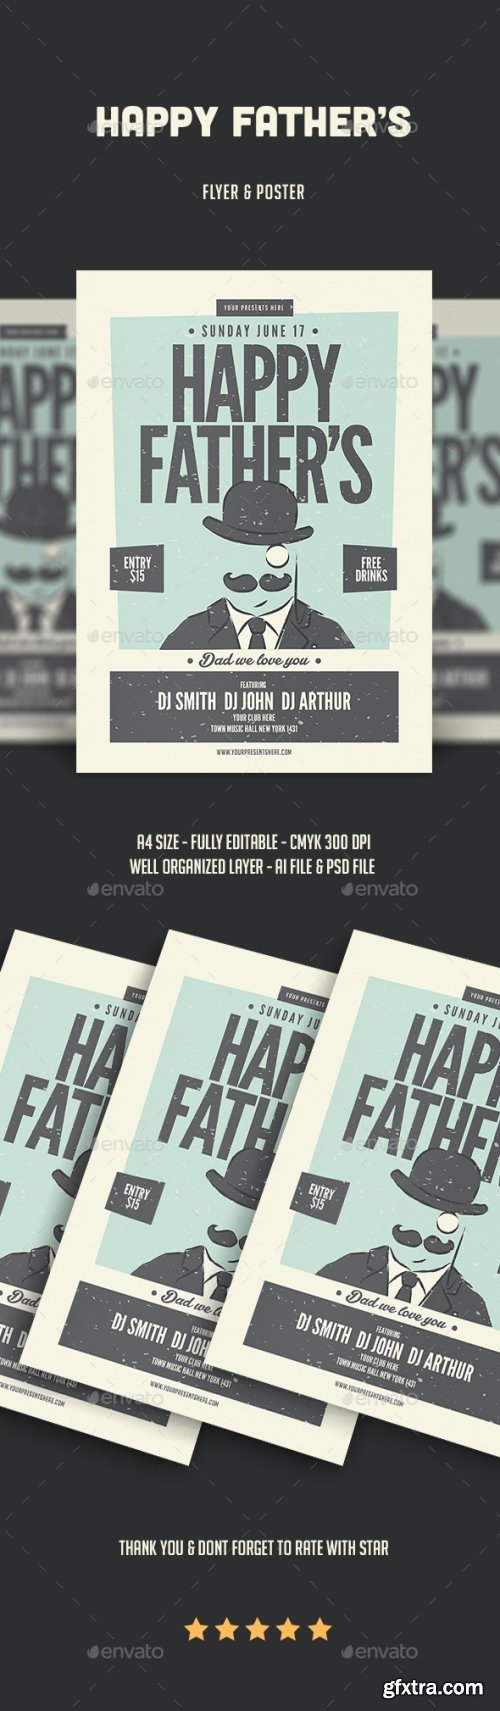 Graphicriver - Father\'s Day Flyer 22038751